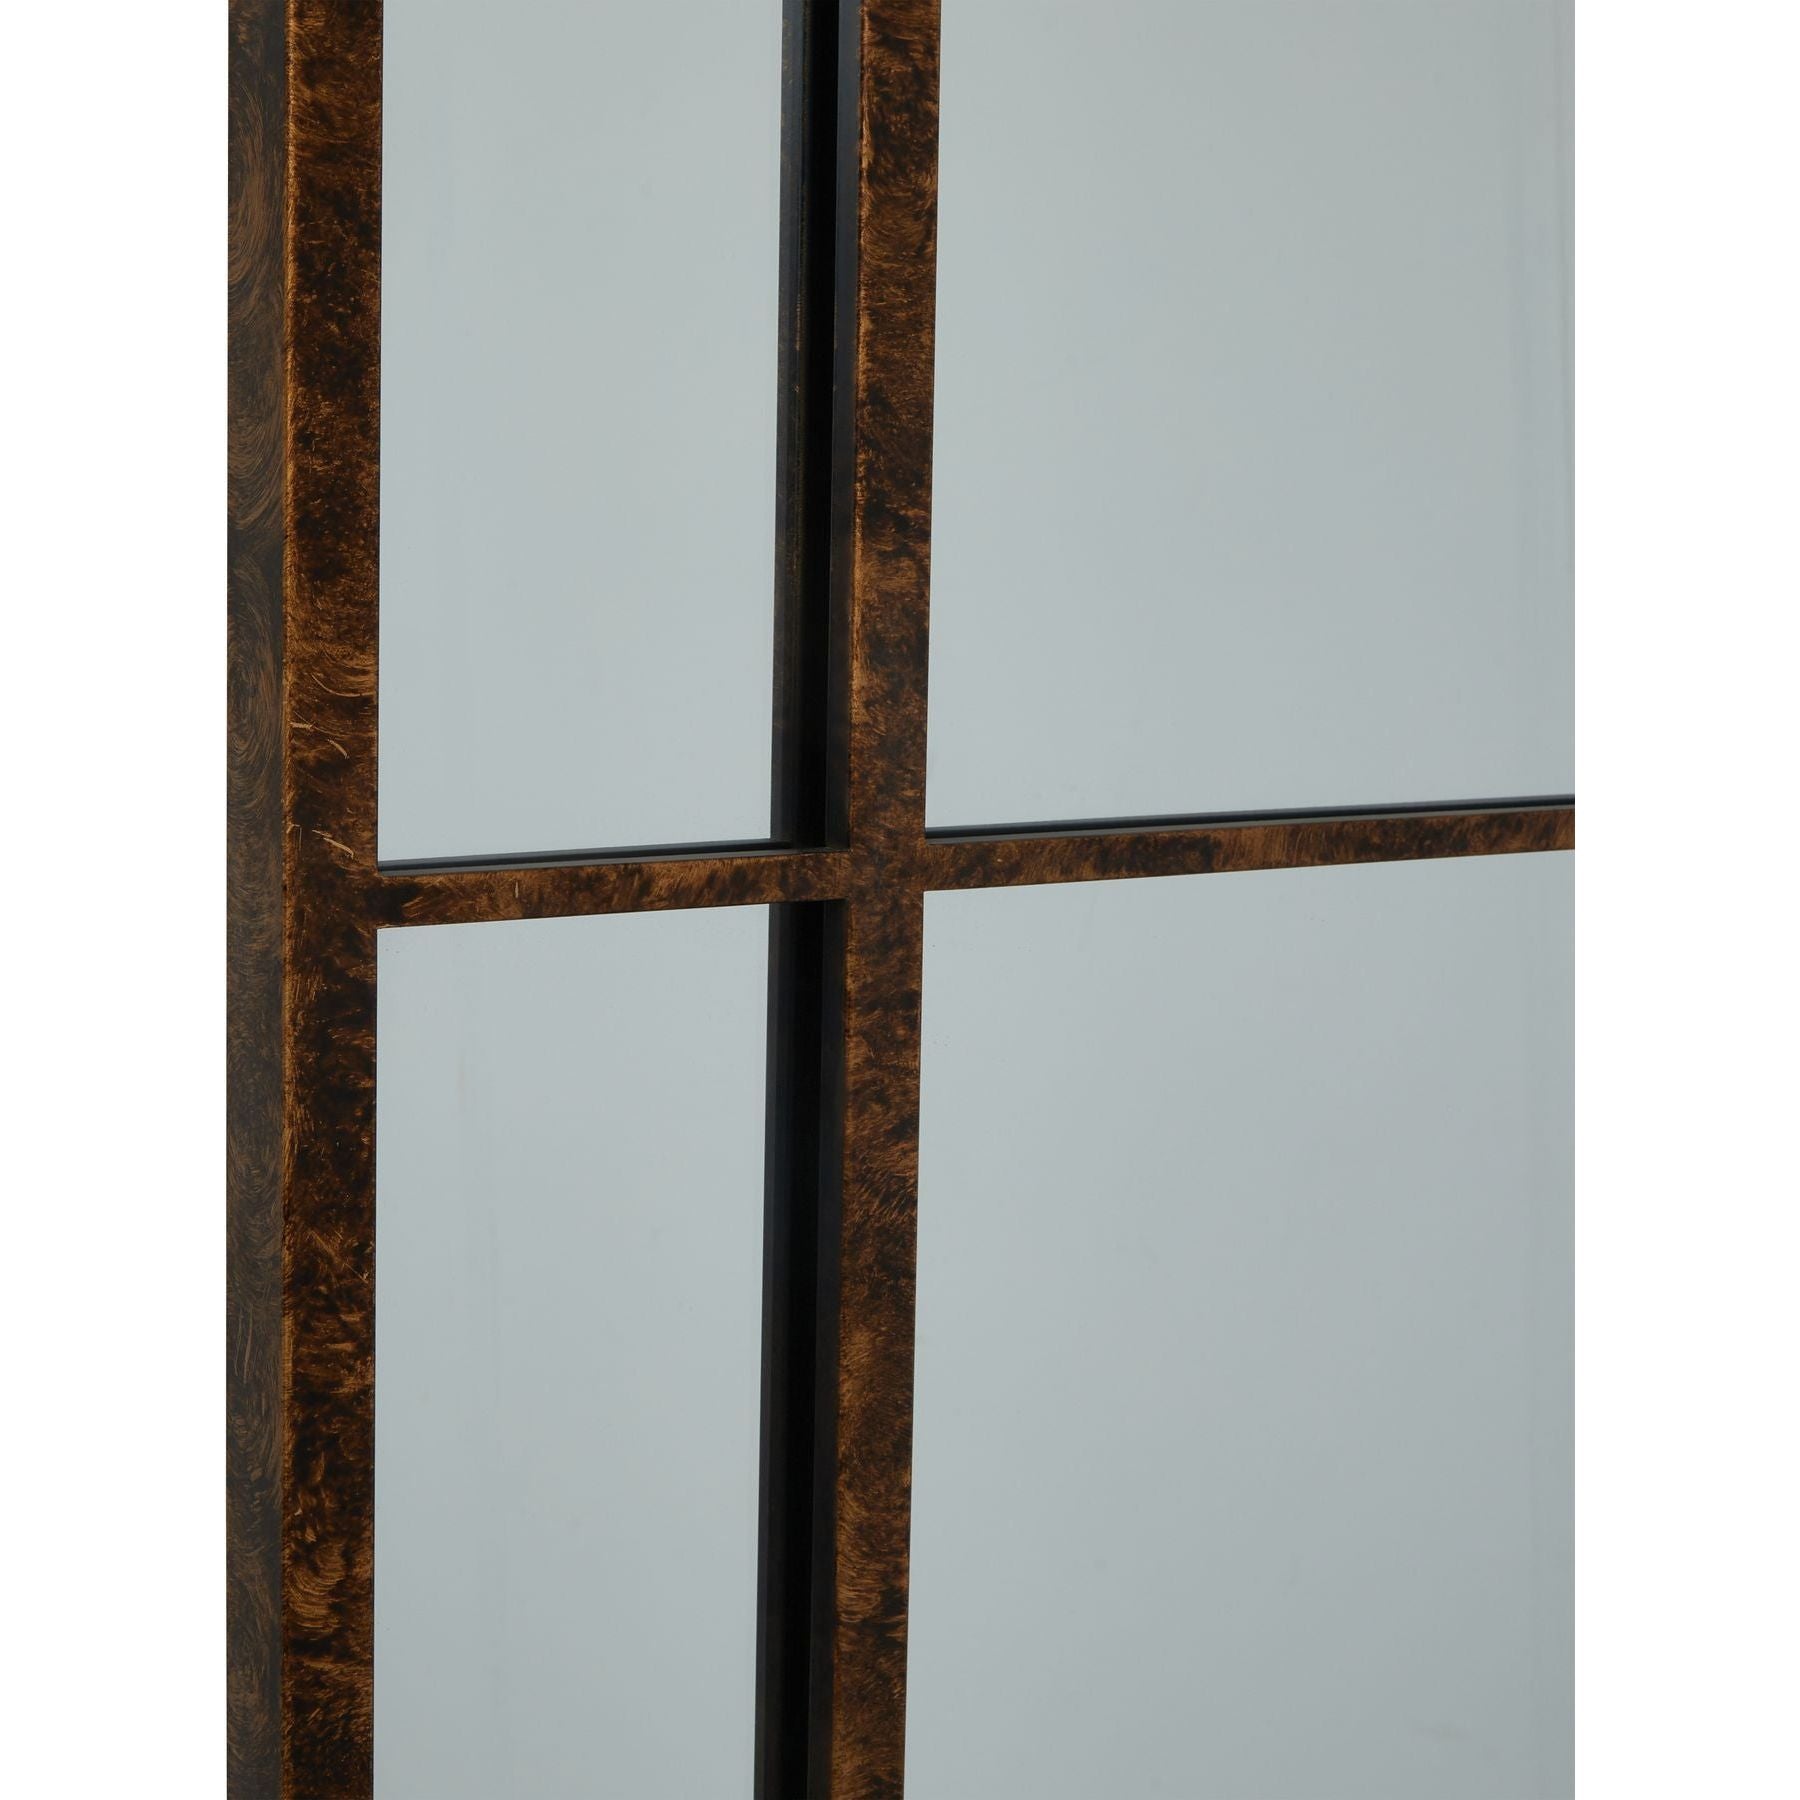 Rust Effect Large Arched Window Mirror - Ashton and Finch